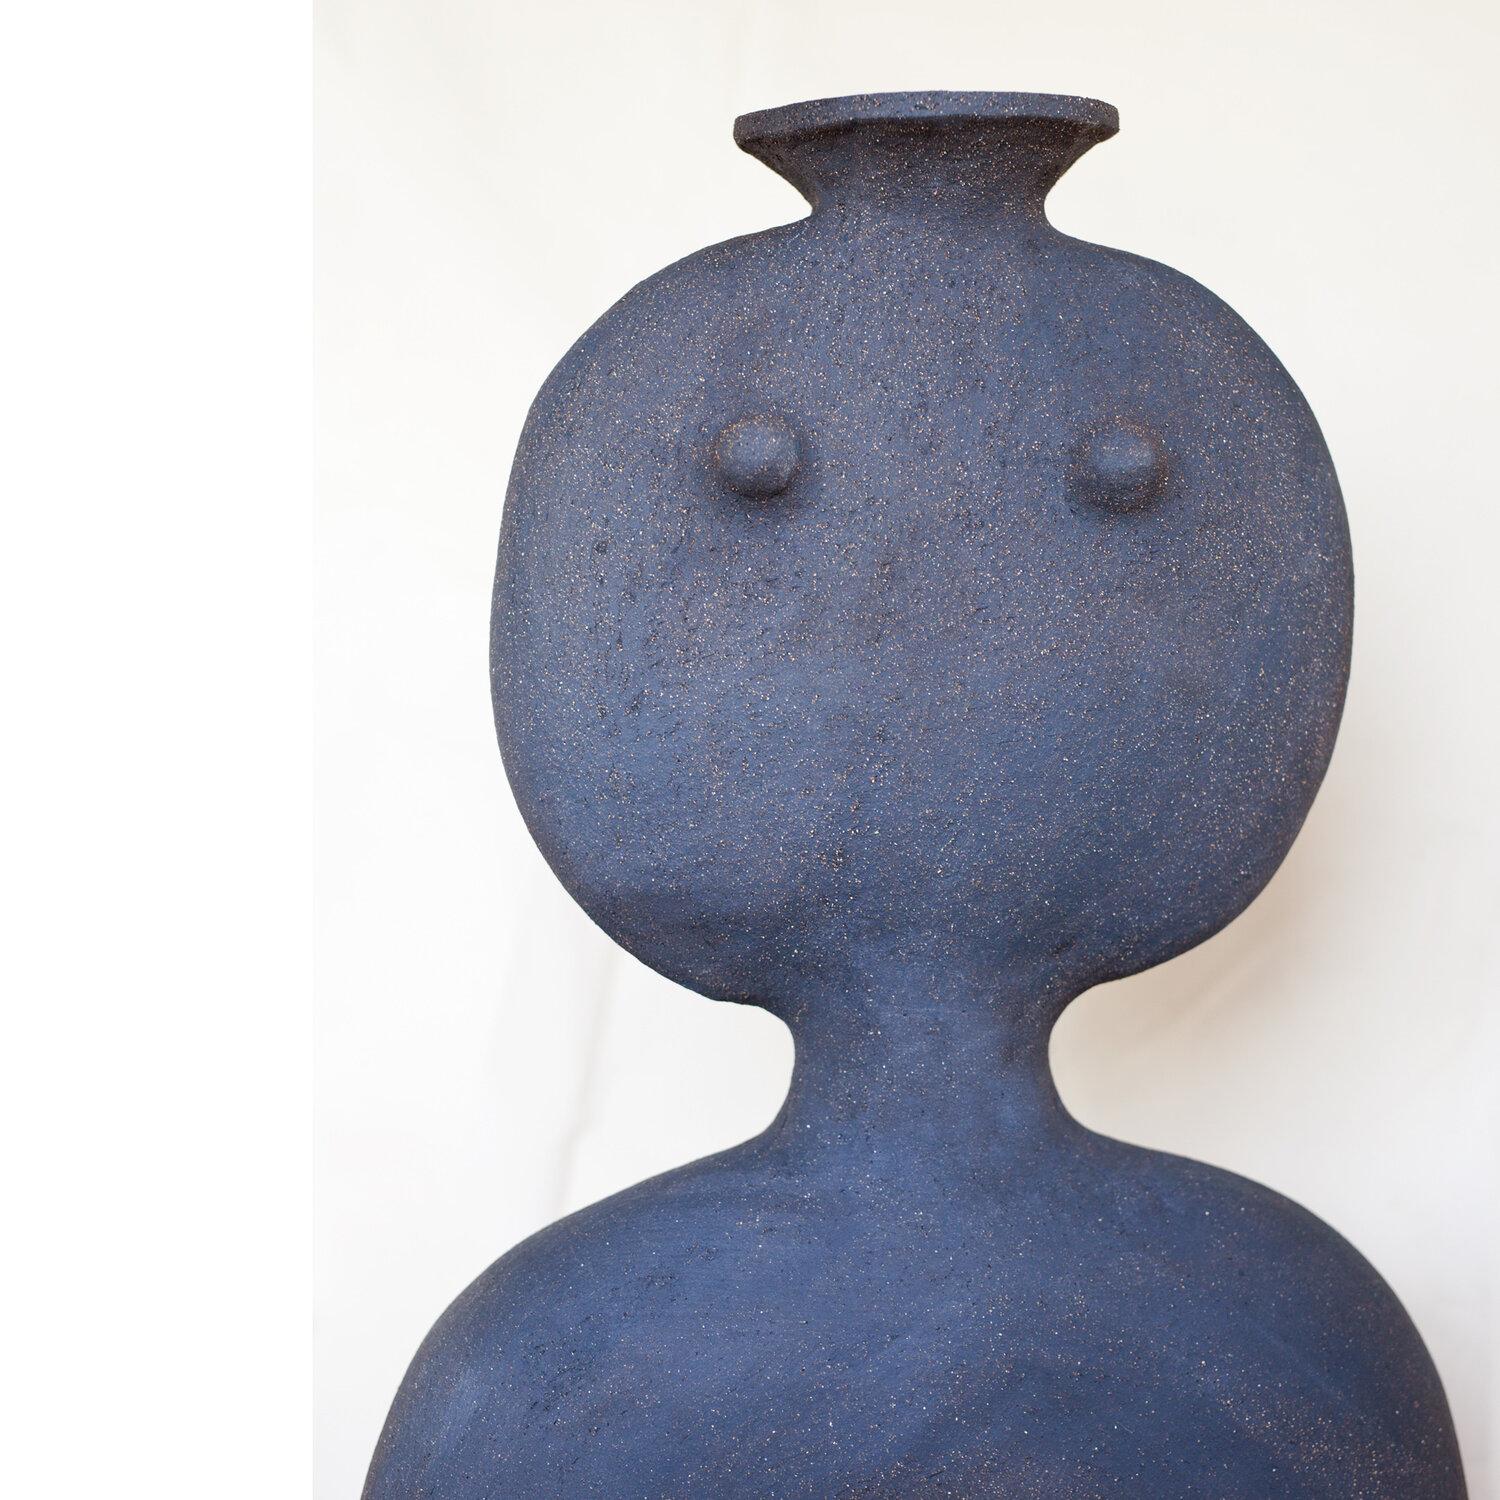 British Contemporary and Handcrafted, Haniwa Warrior 05 Decorative Piece by Noe Kuremoto For Sale